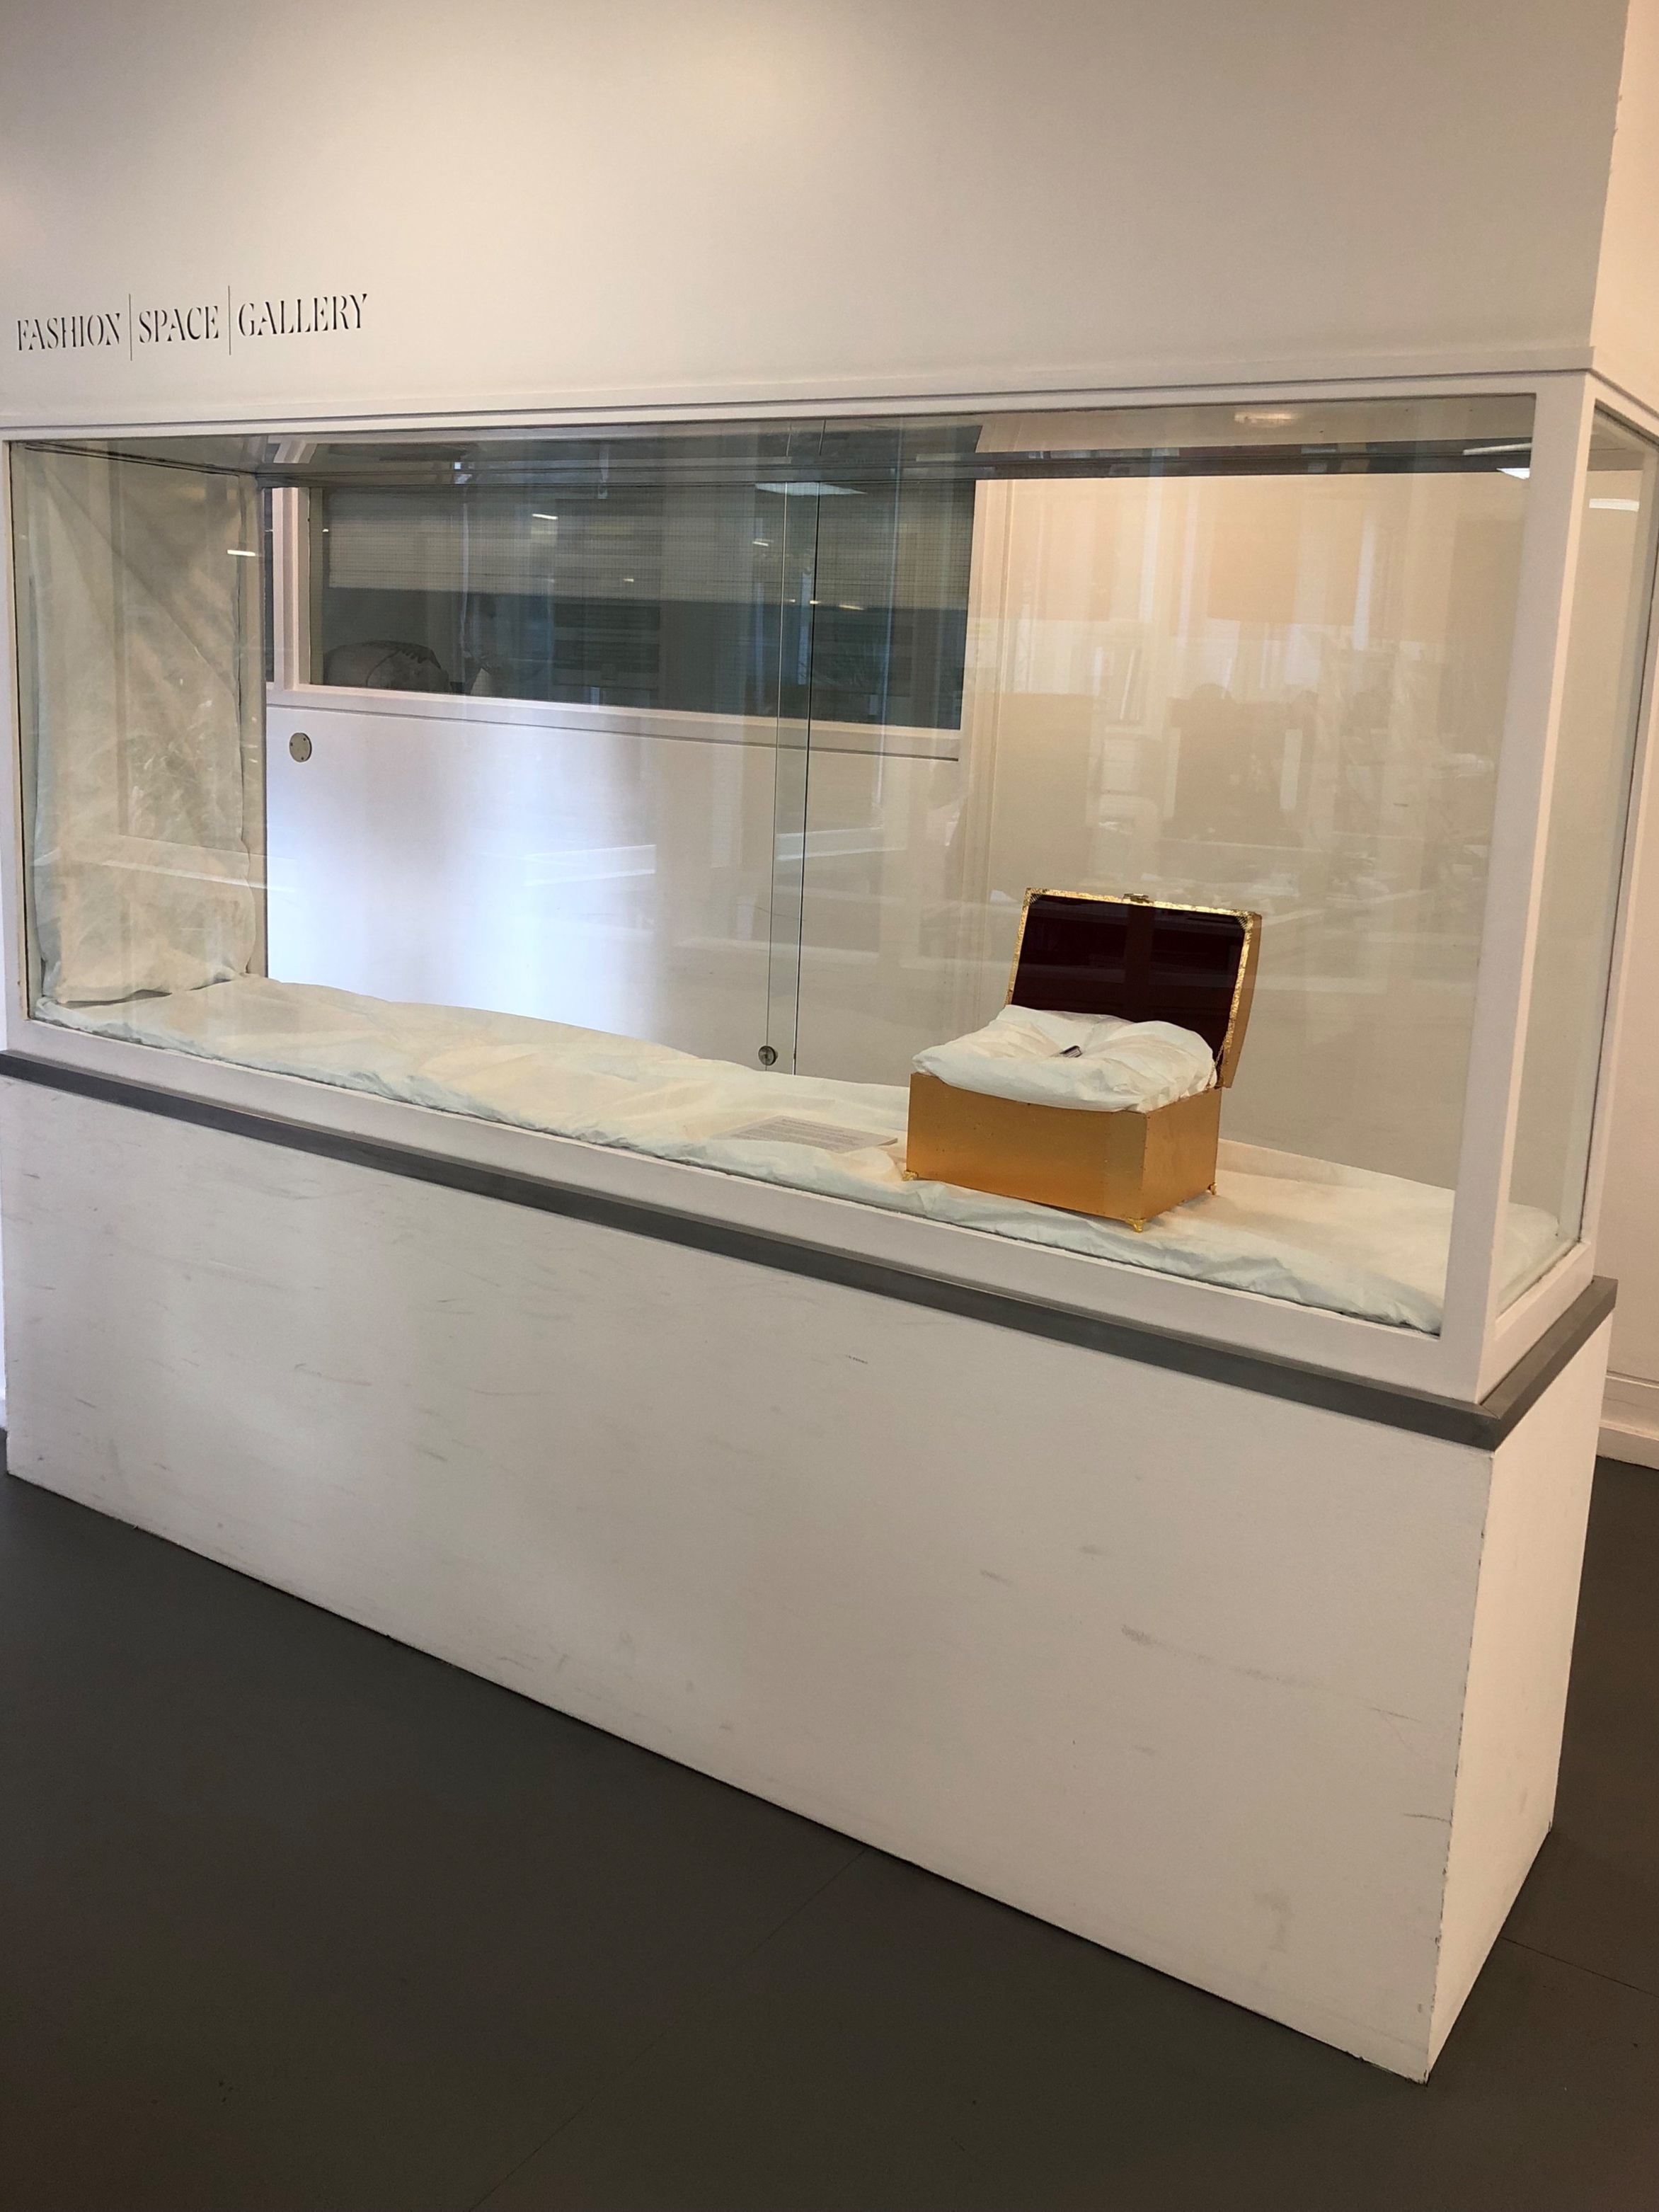   The Sacred Profane: Reliquary of Francis Golding , an exhibition questioning object biography and curatorial interruption, curated by Cyana Madsen (September - December 2018) 